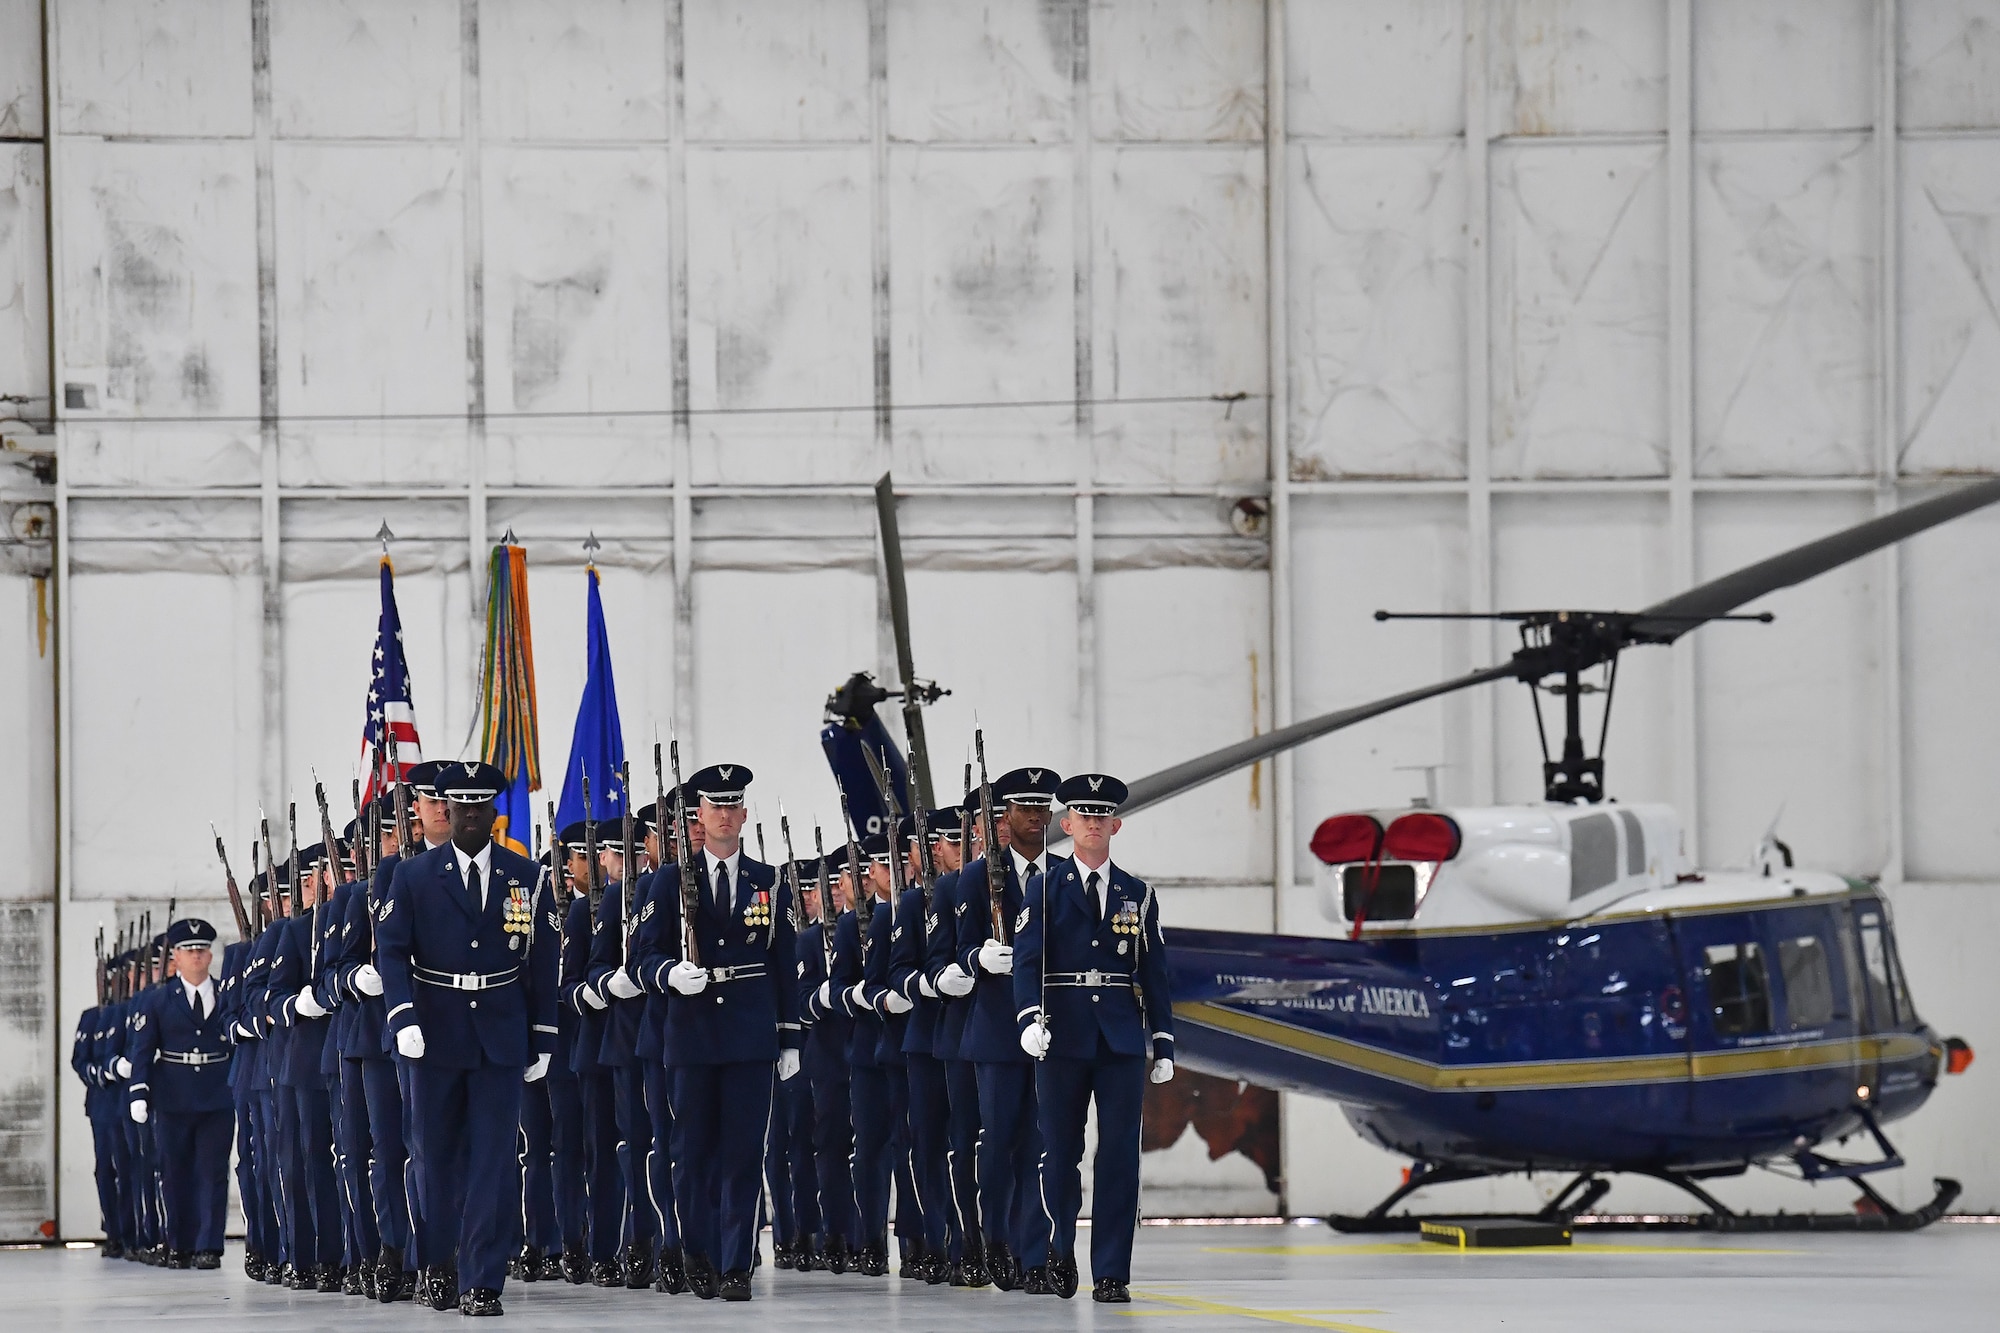 The Air Force Honor Guard marches into place during the Air Force District of Washington Change of Command Ceremony at Joint Base Andrews, Md., July 9, 2019. (Air Force Photo by Adrian Cadiz)